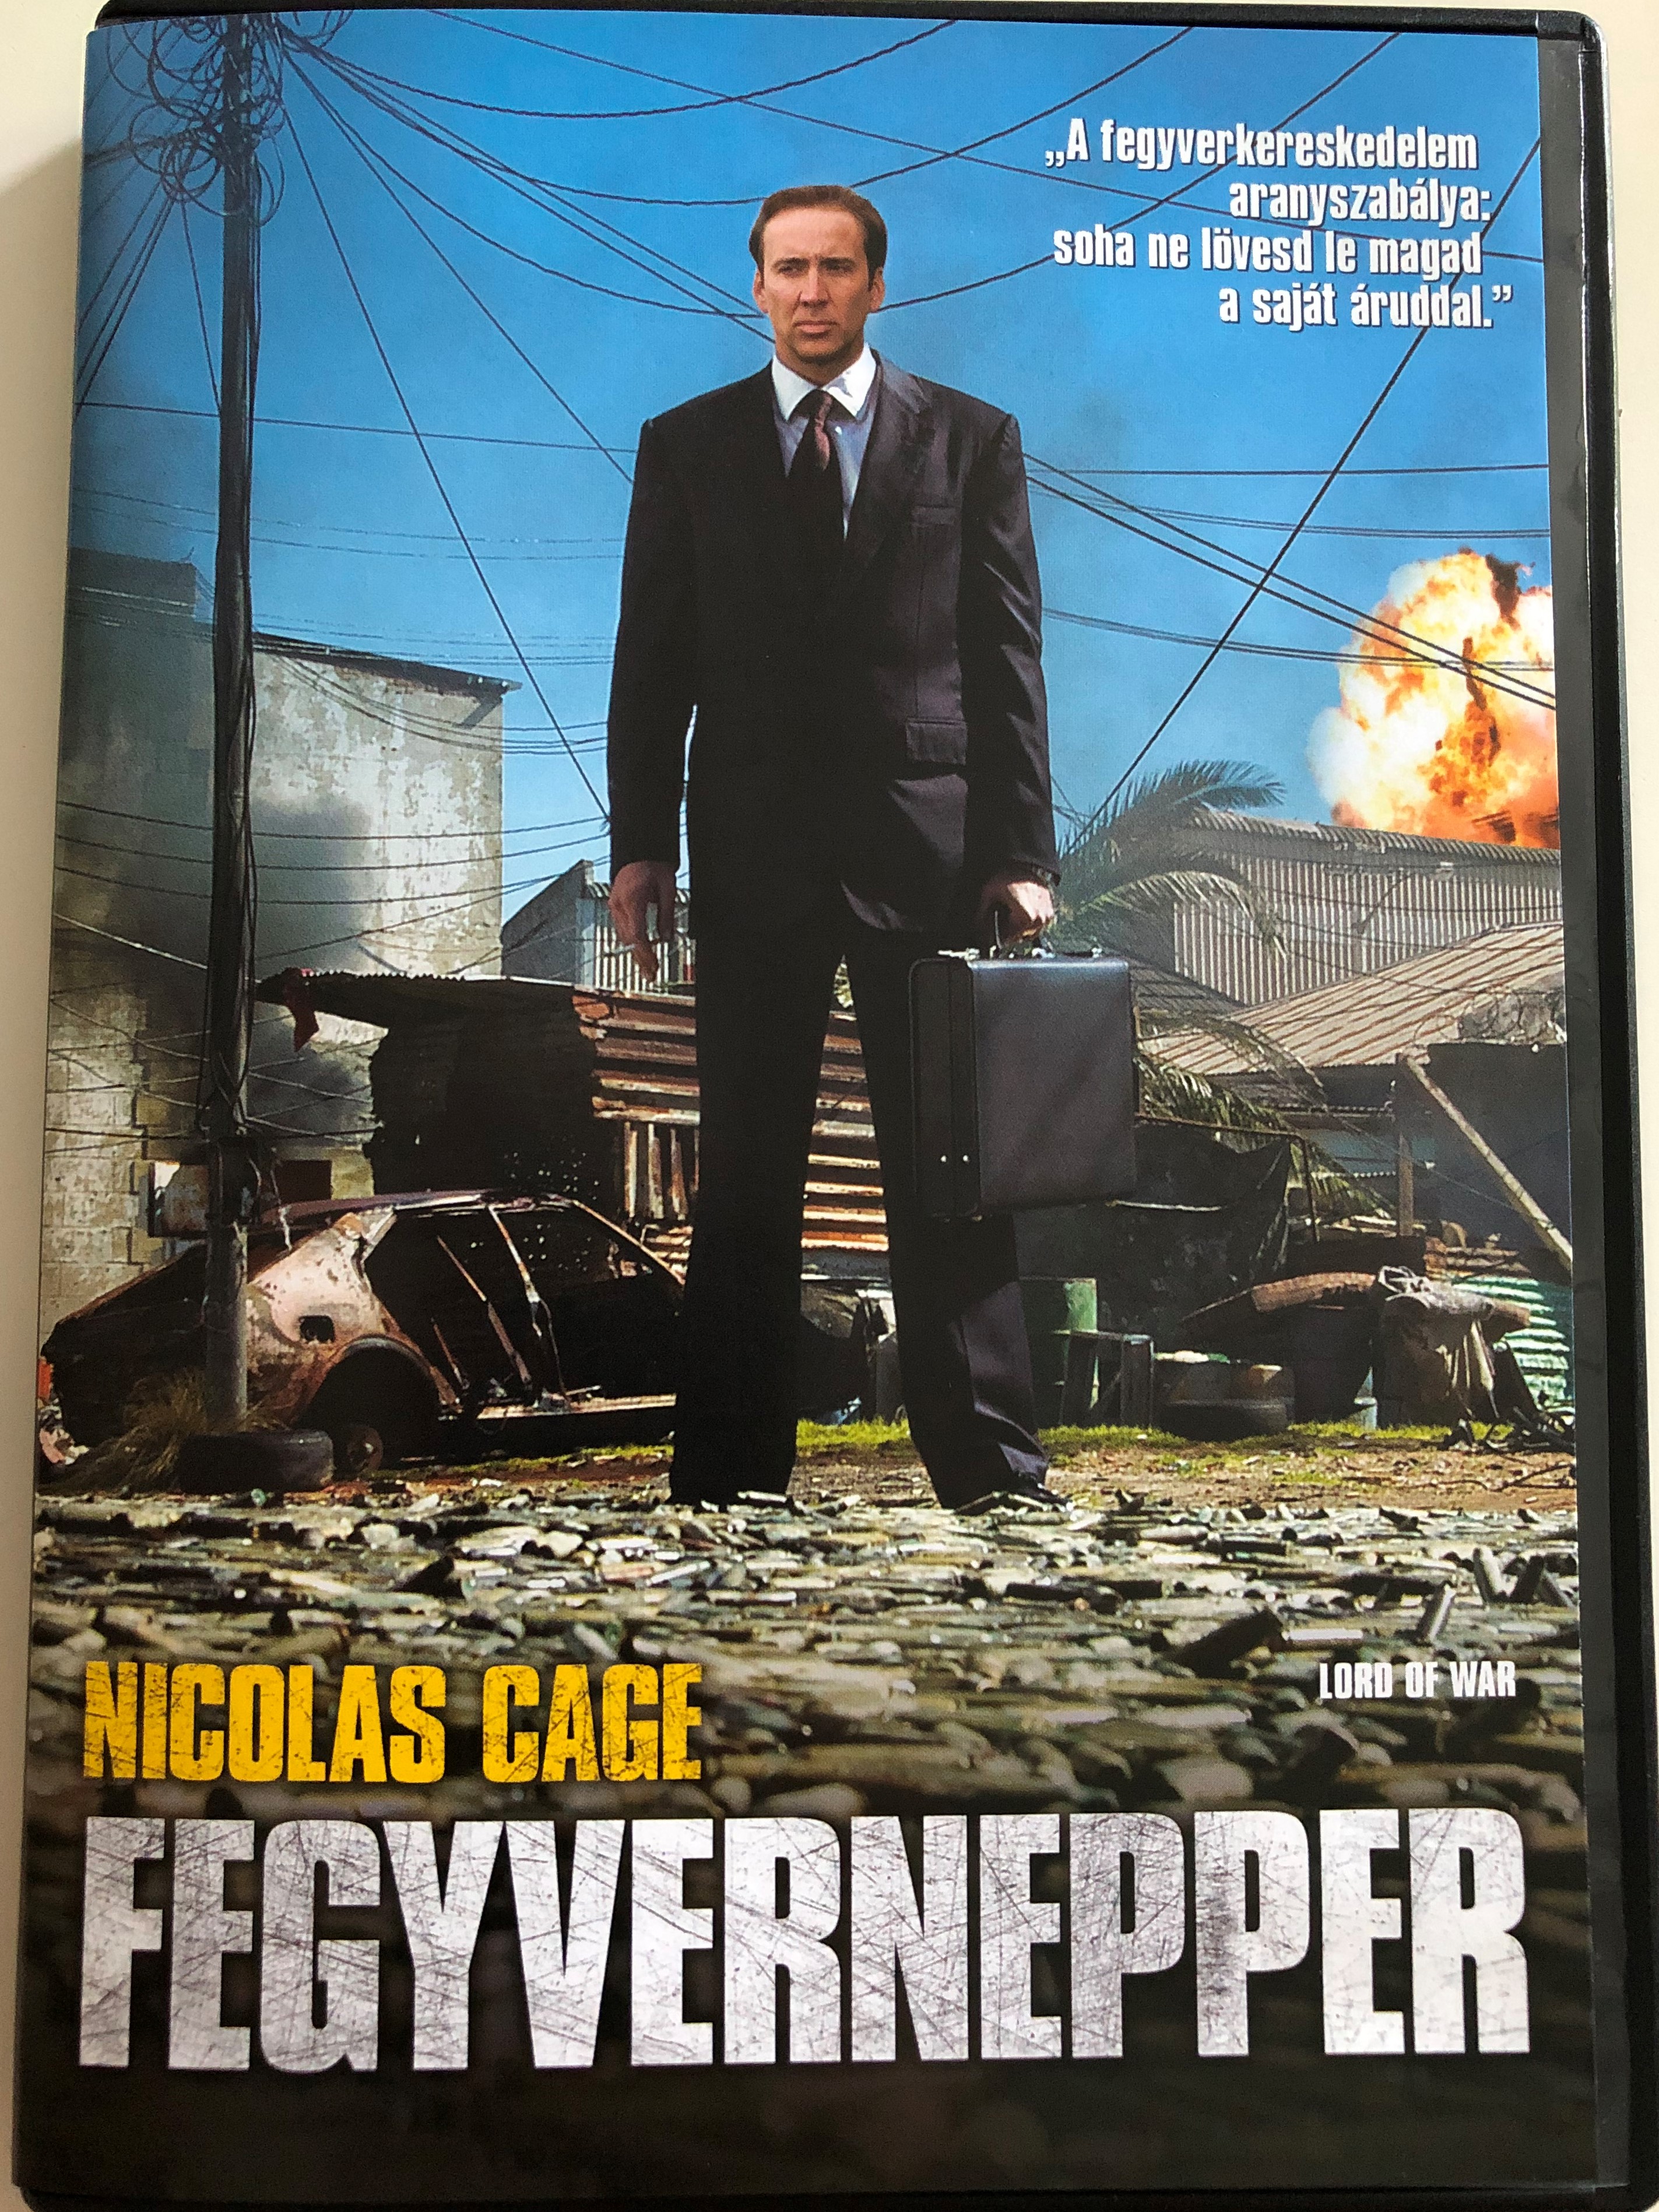 Lord of War DVD 2005 Fegyvernepper / Directed by Andrew Niccol / Starring:  Nicolas Cage, Jared Leto, Bridget Moynahan, Ian Holm - bibleinmylanguage